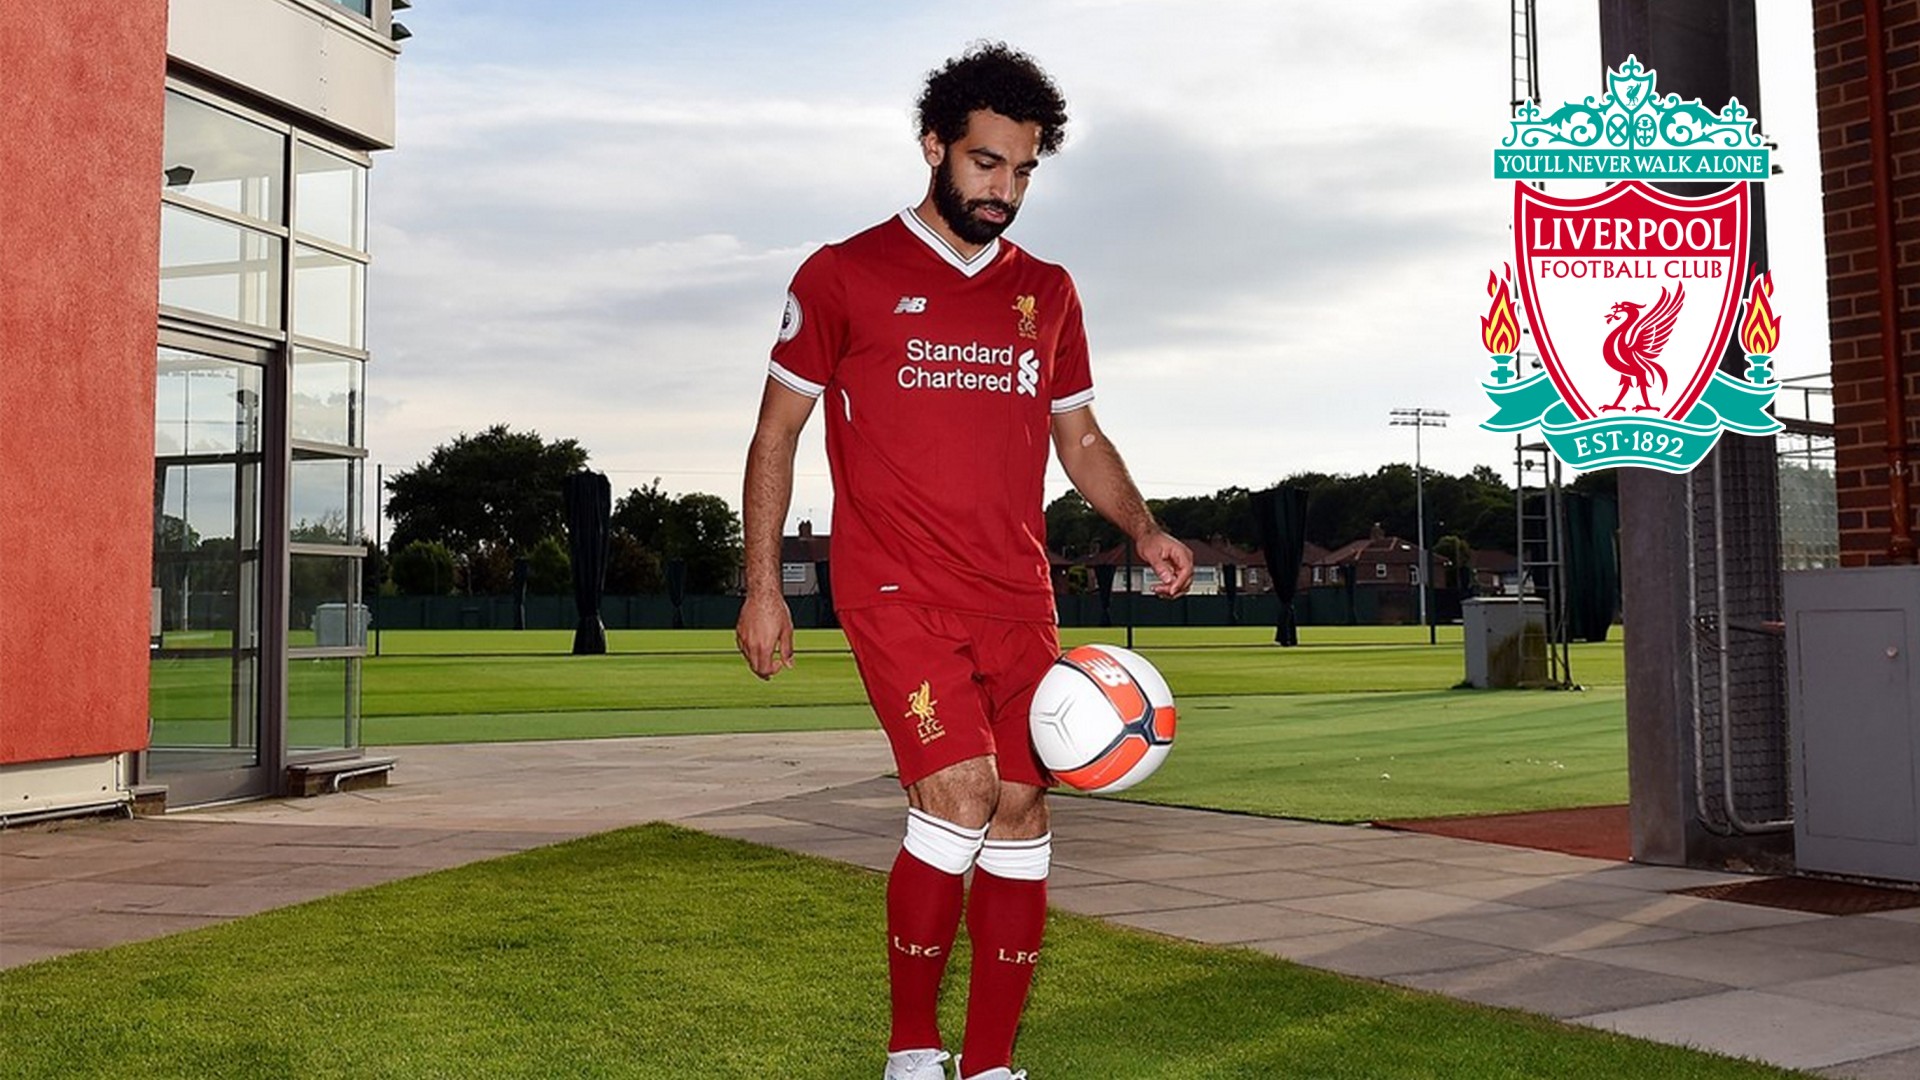 Best Liverpool Mohamed Salah Wallpaper HD With Resolution 1920X1080 pixel. You can make this wallpaper for your Desktop Computer Backgrounds, Mac Wallpapers, Android Lock screen or iPhone Screensavers